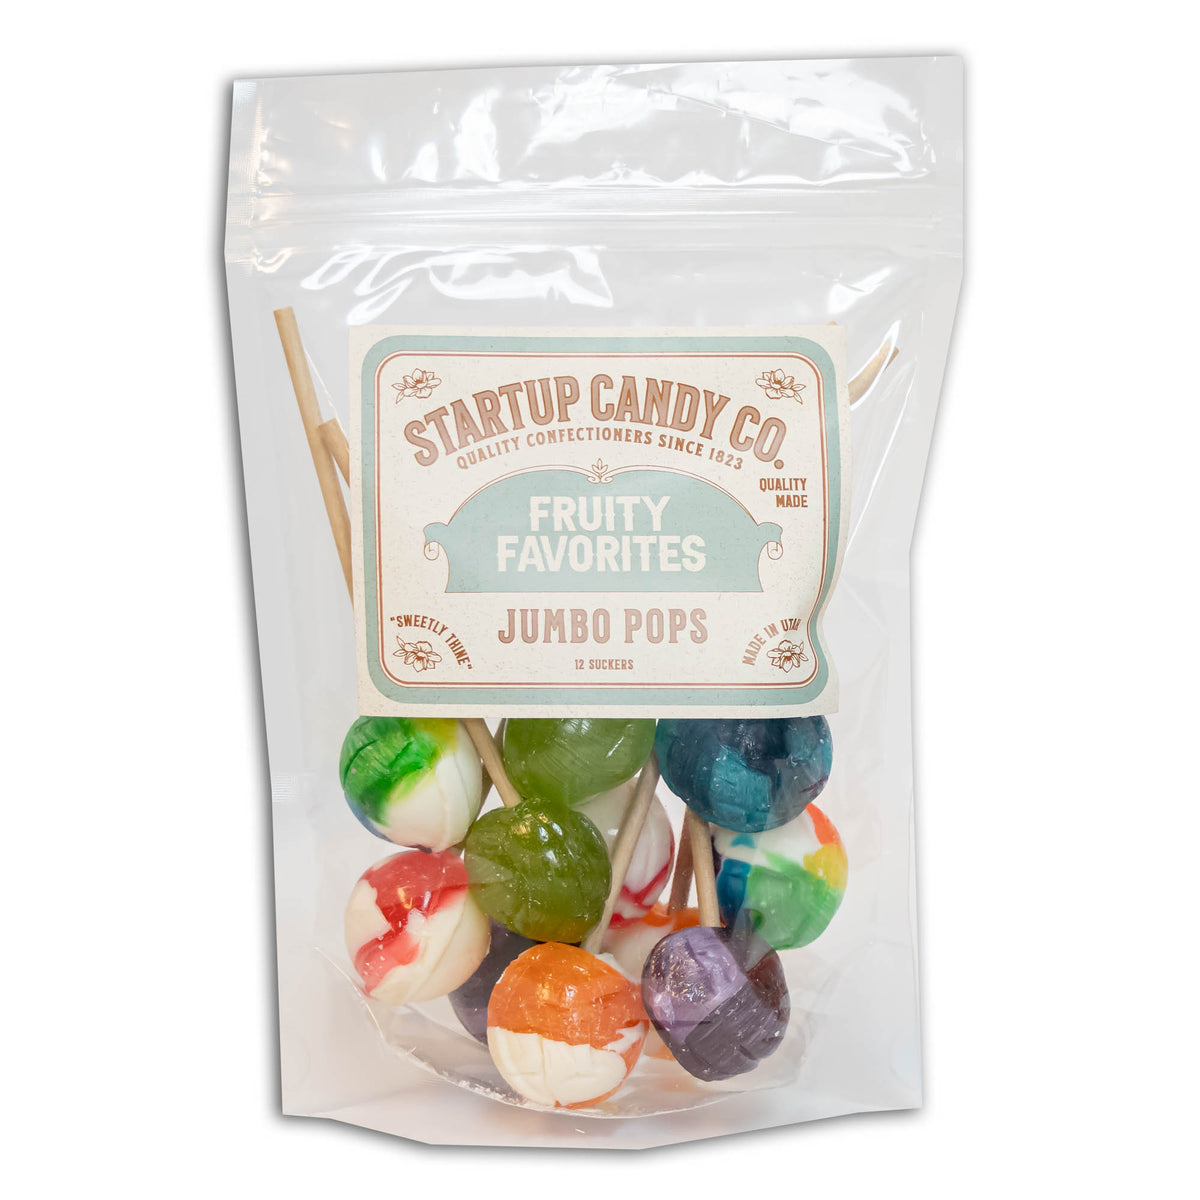 Startup Candy Company – Startup Candy Co.